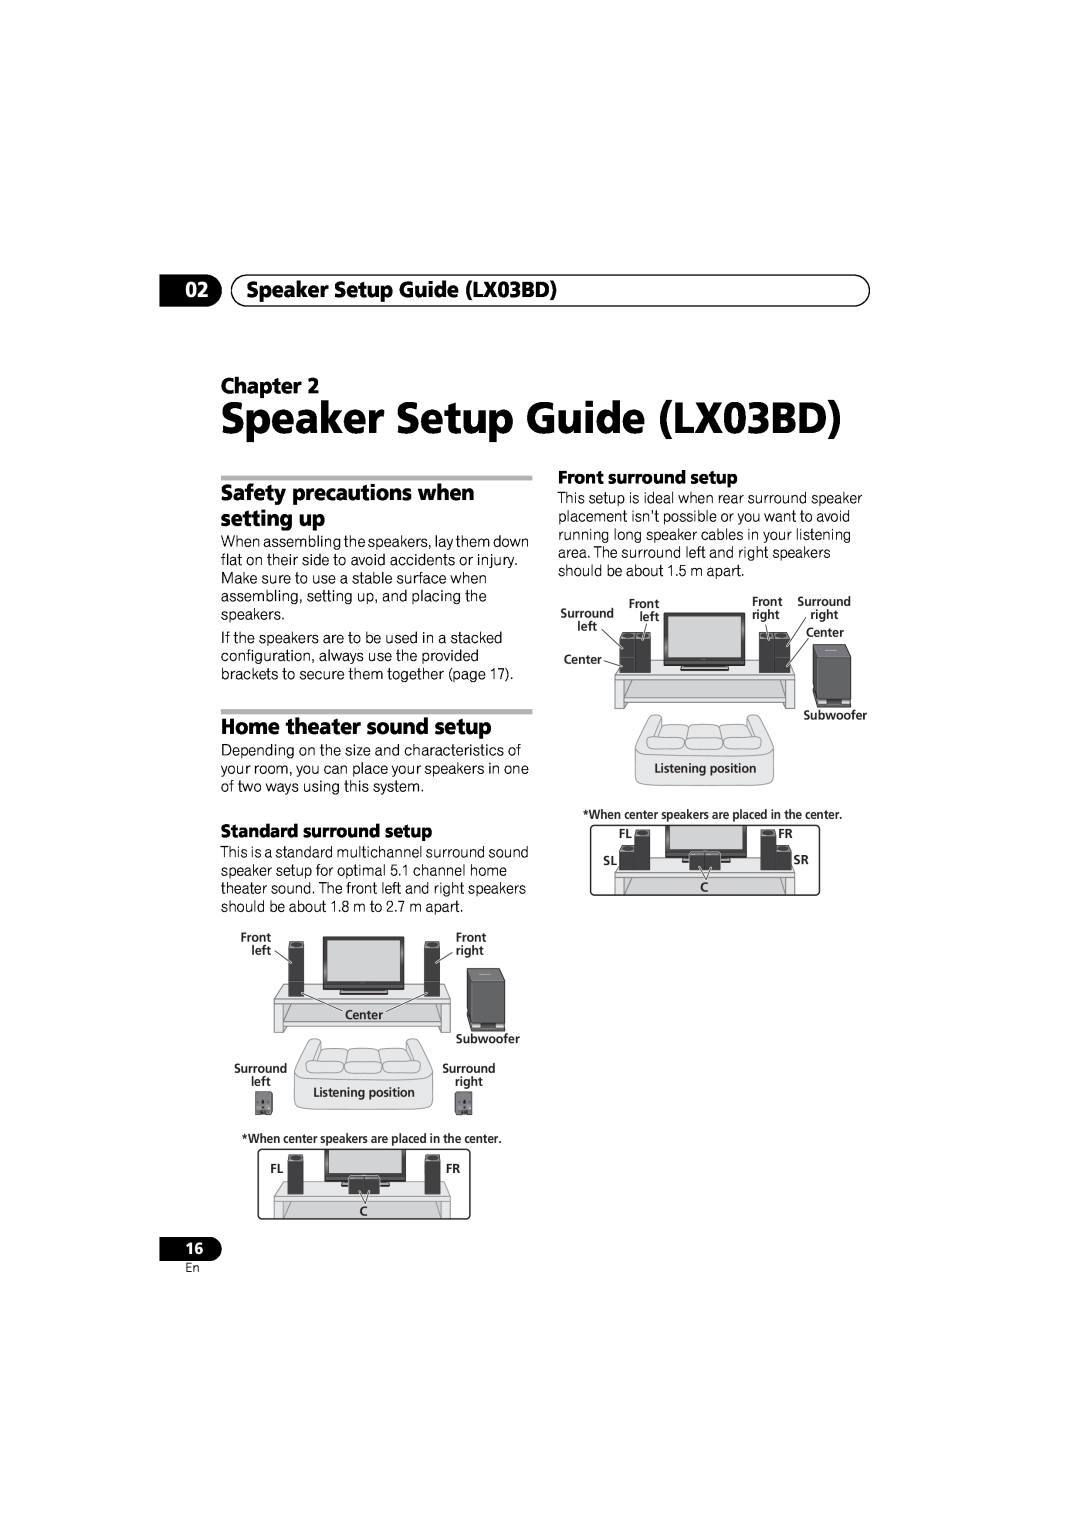 Pioneer SX-LX03 02Speaker Setup Guide LX03BD Chapter, Safety precautions when setting up, Home theater sound setup 